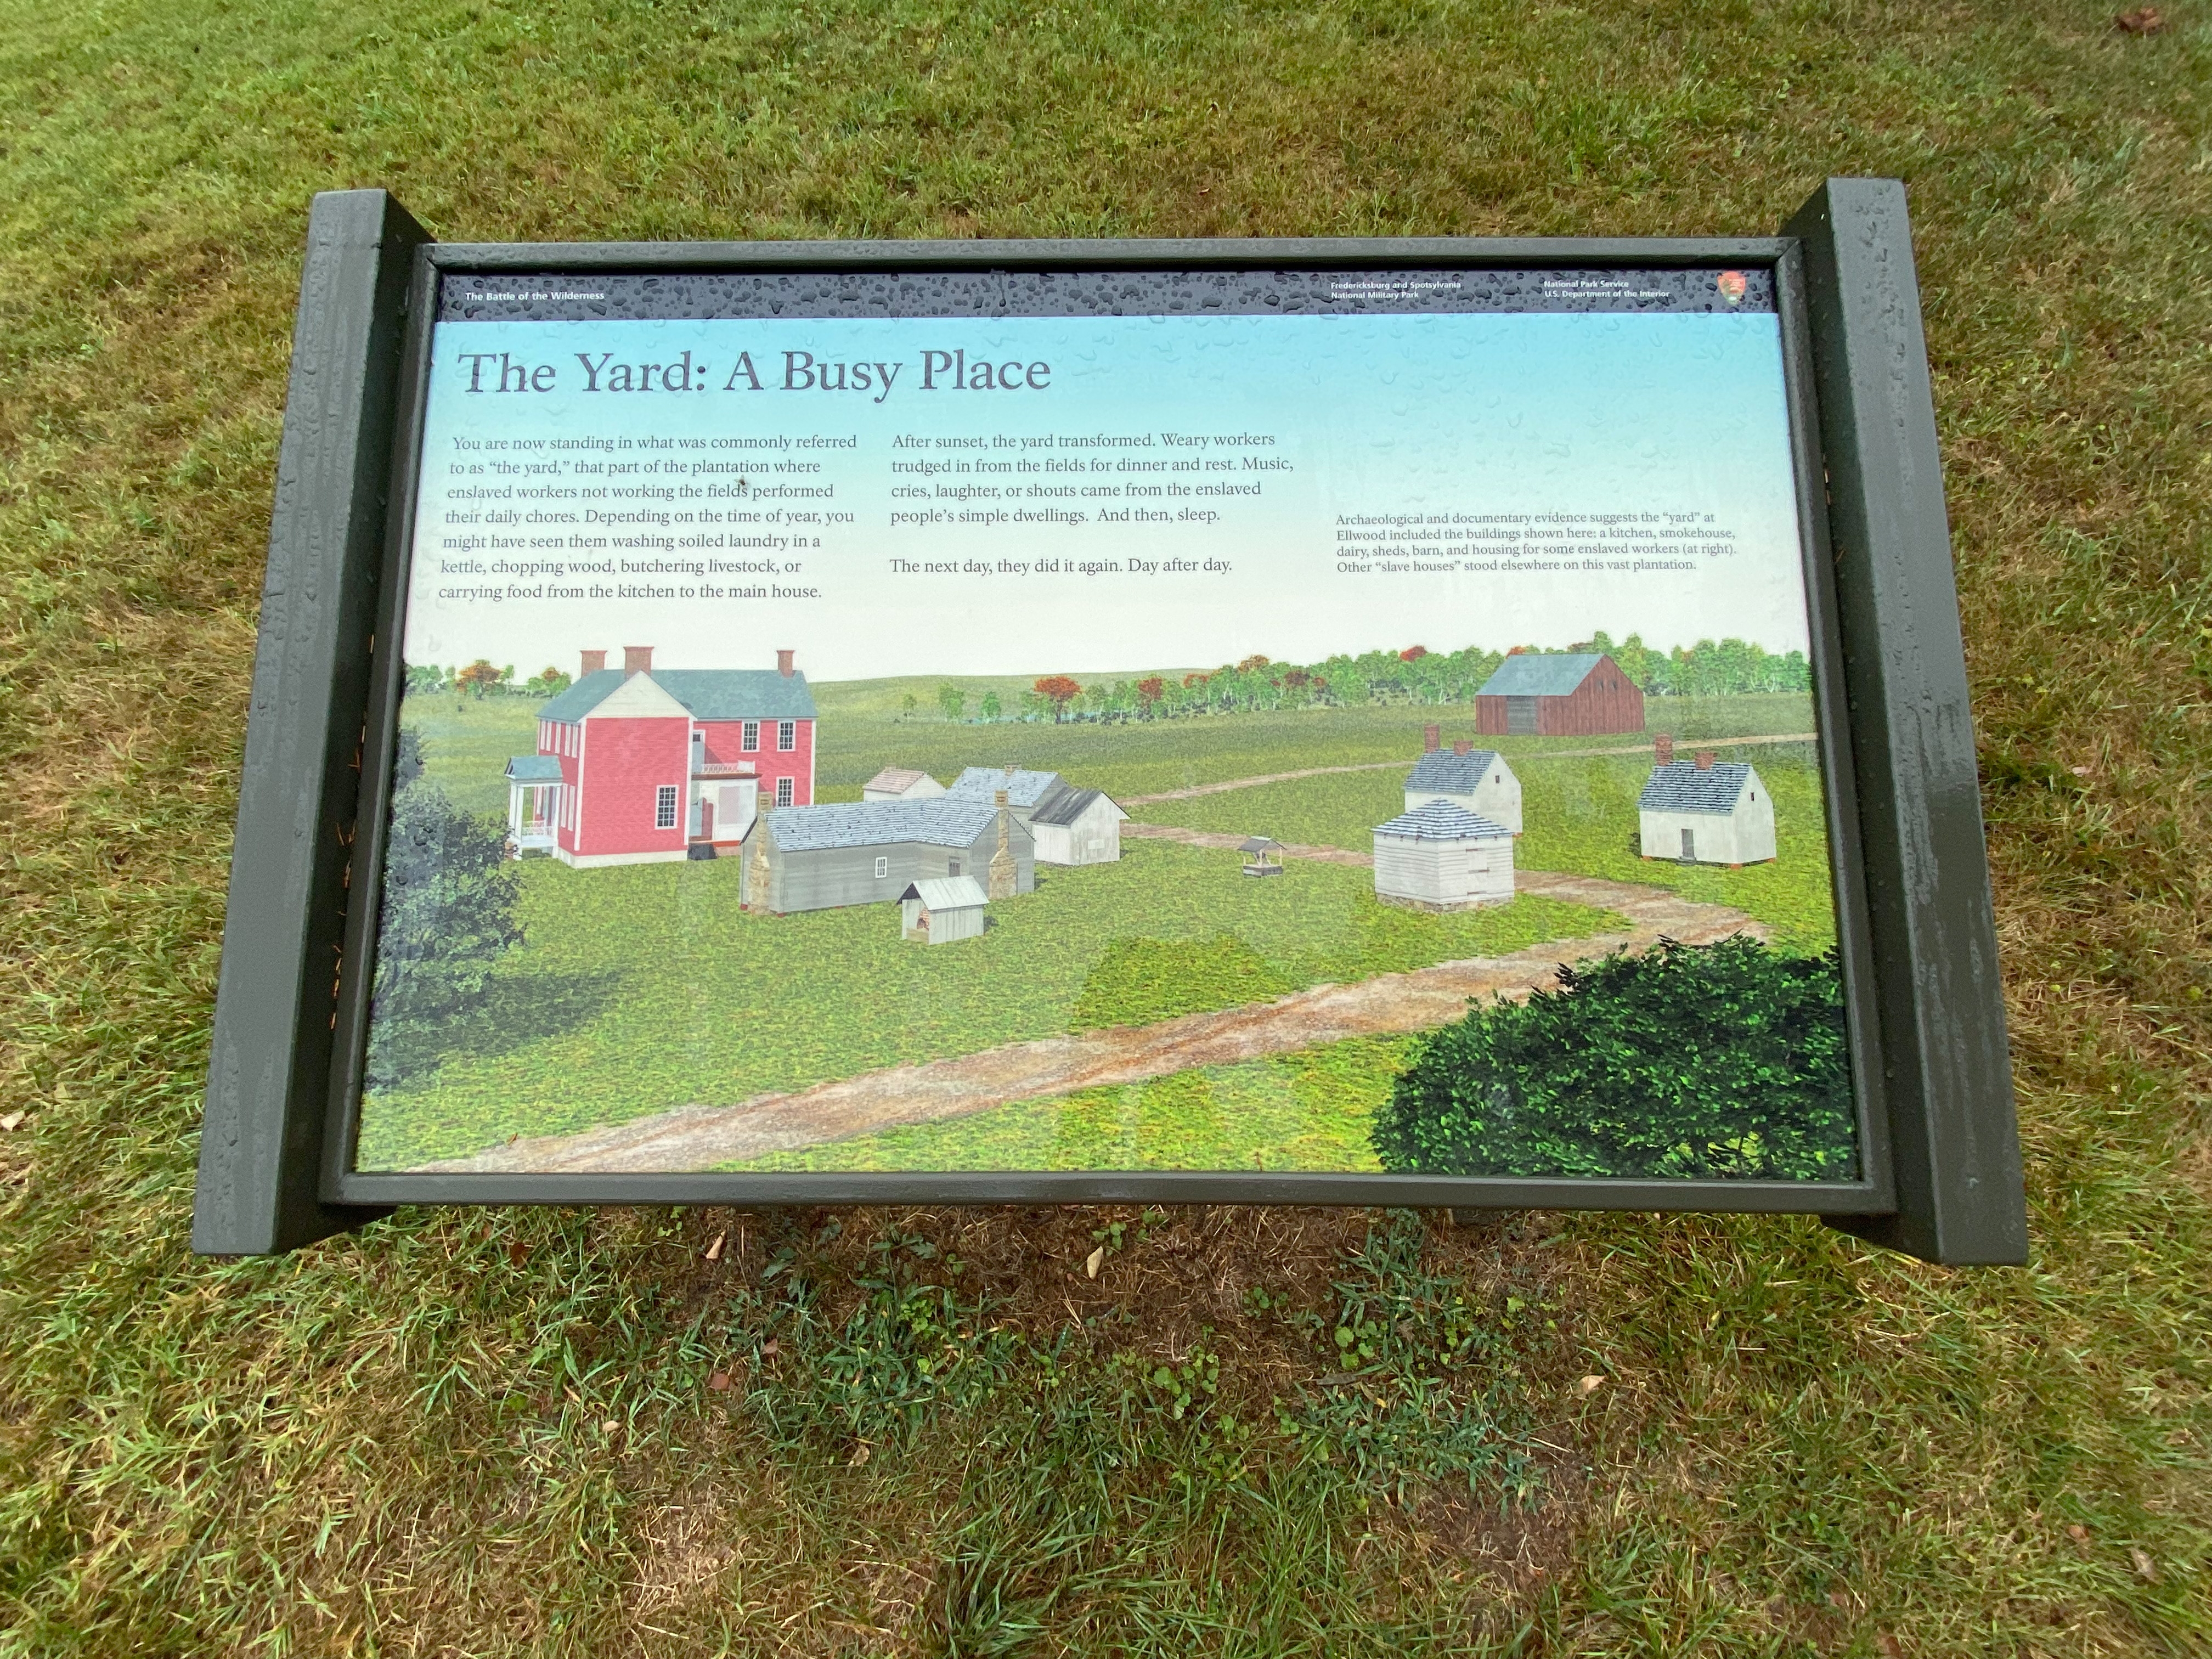 The Yard: A Busy Place Marker